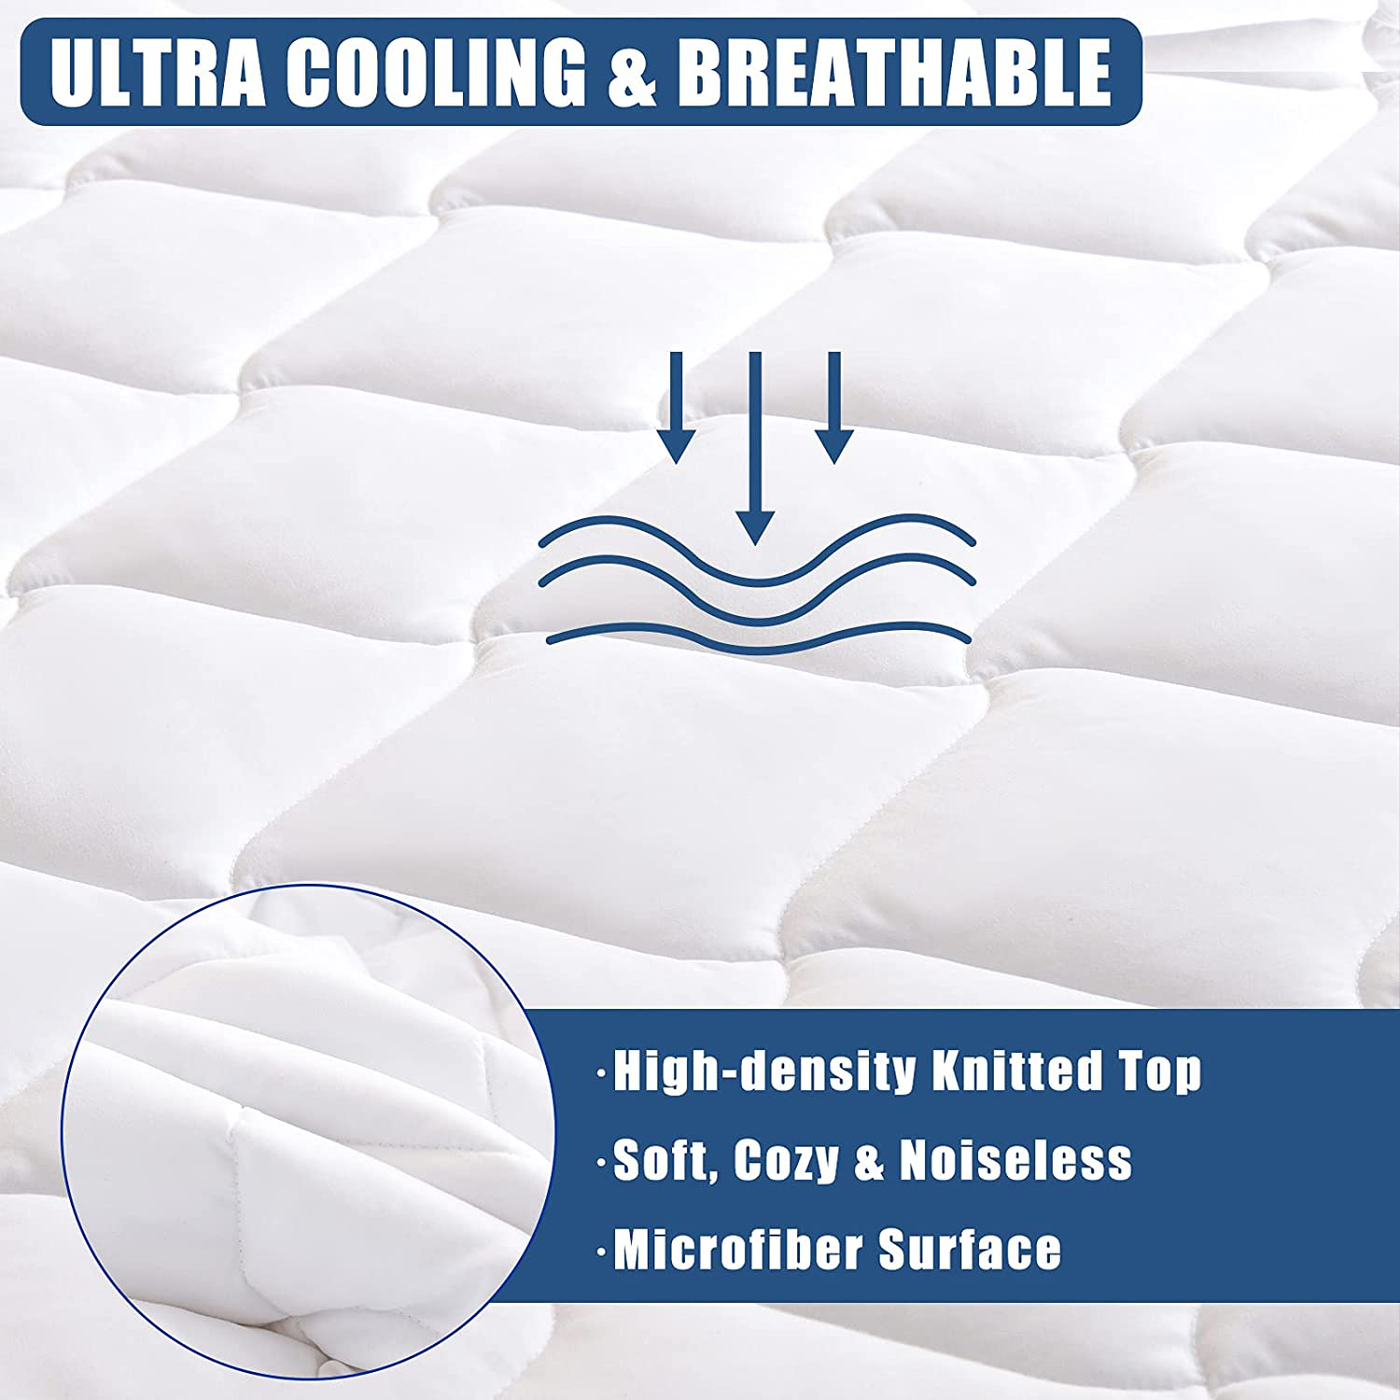 Cal King Size Quilted Fitted Mattress Pad, Waterproof Breathable Cooling Mattress pad, Stretches up to 21 Inches Deep Pocket Hollow Alternative Filling Noiseless Mattress Cover